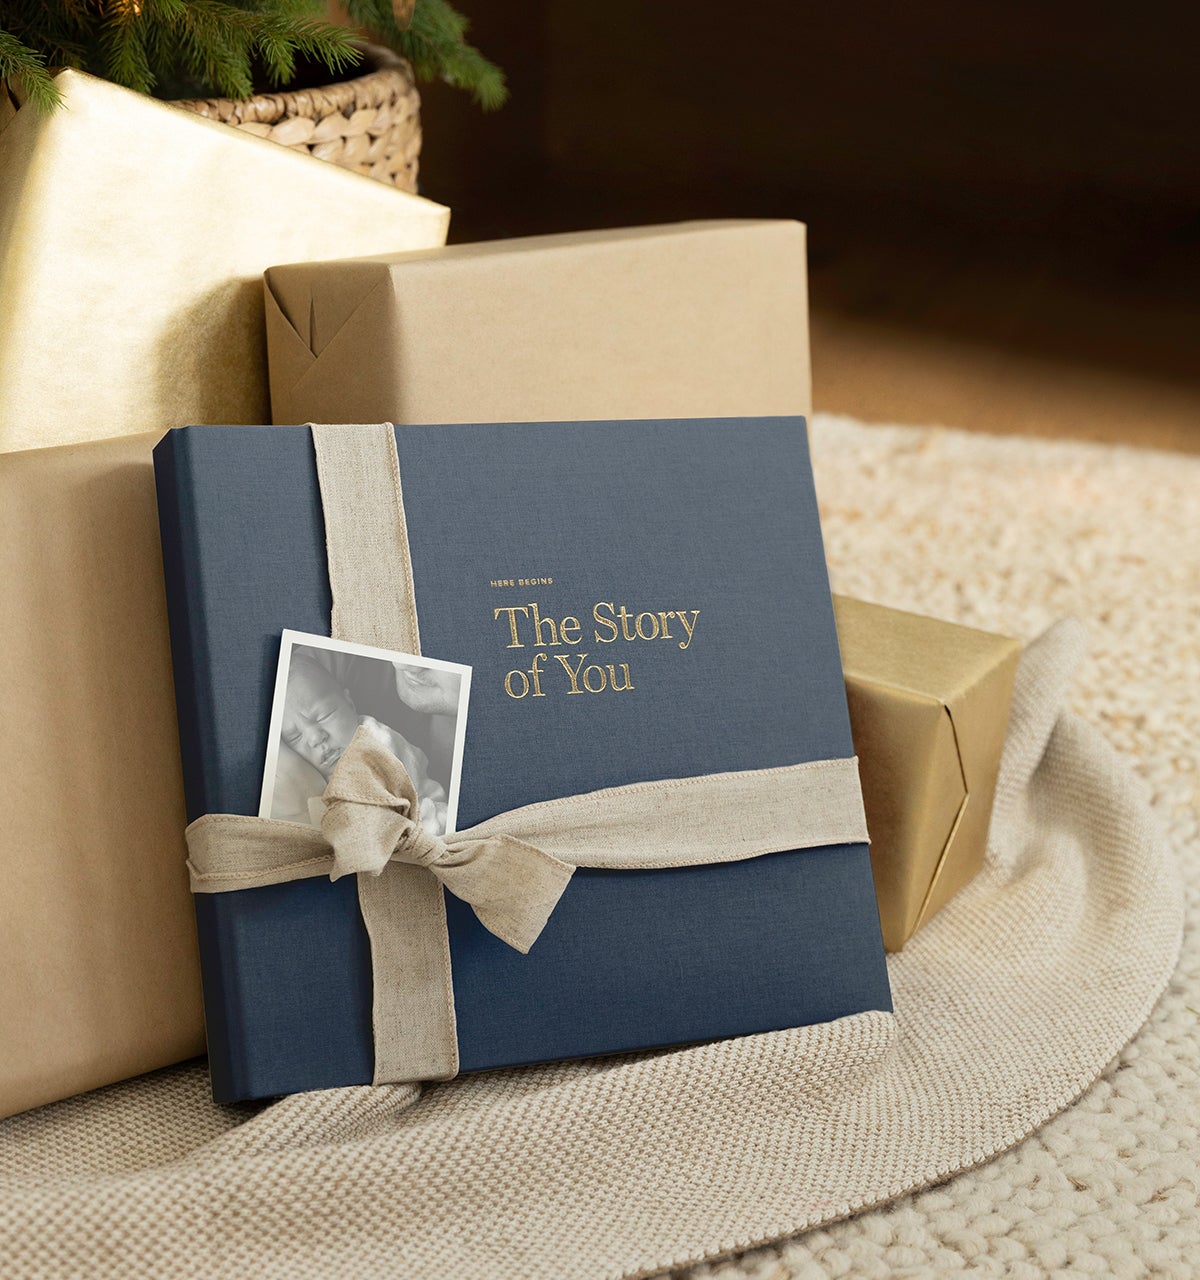 Artifact Uprising Story of You Baby Book wrapped with ribbon next to wrapped gifts